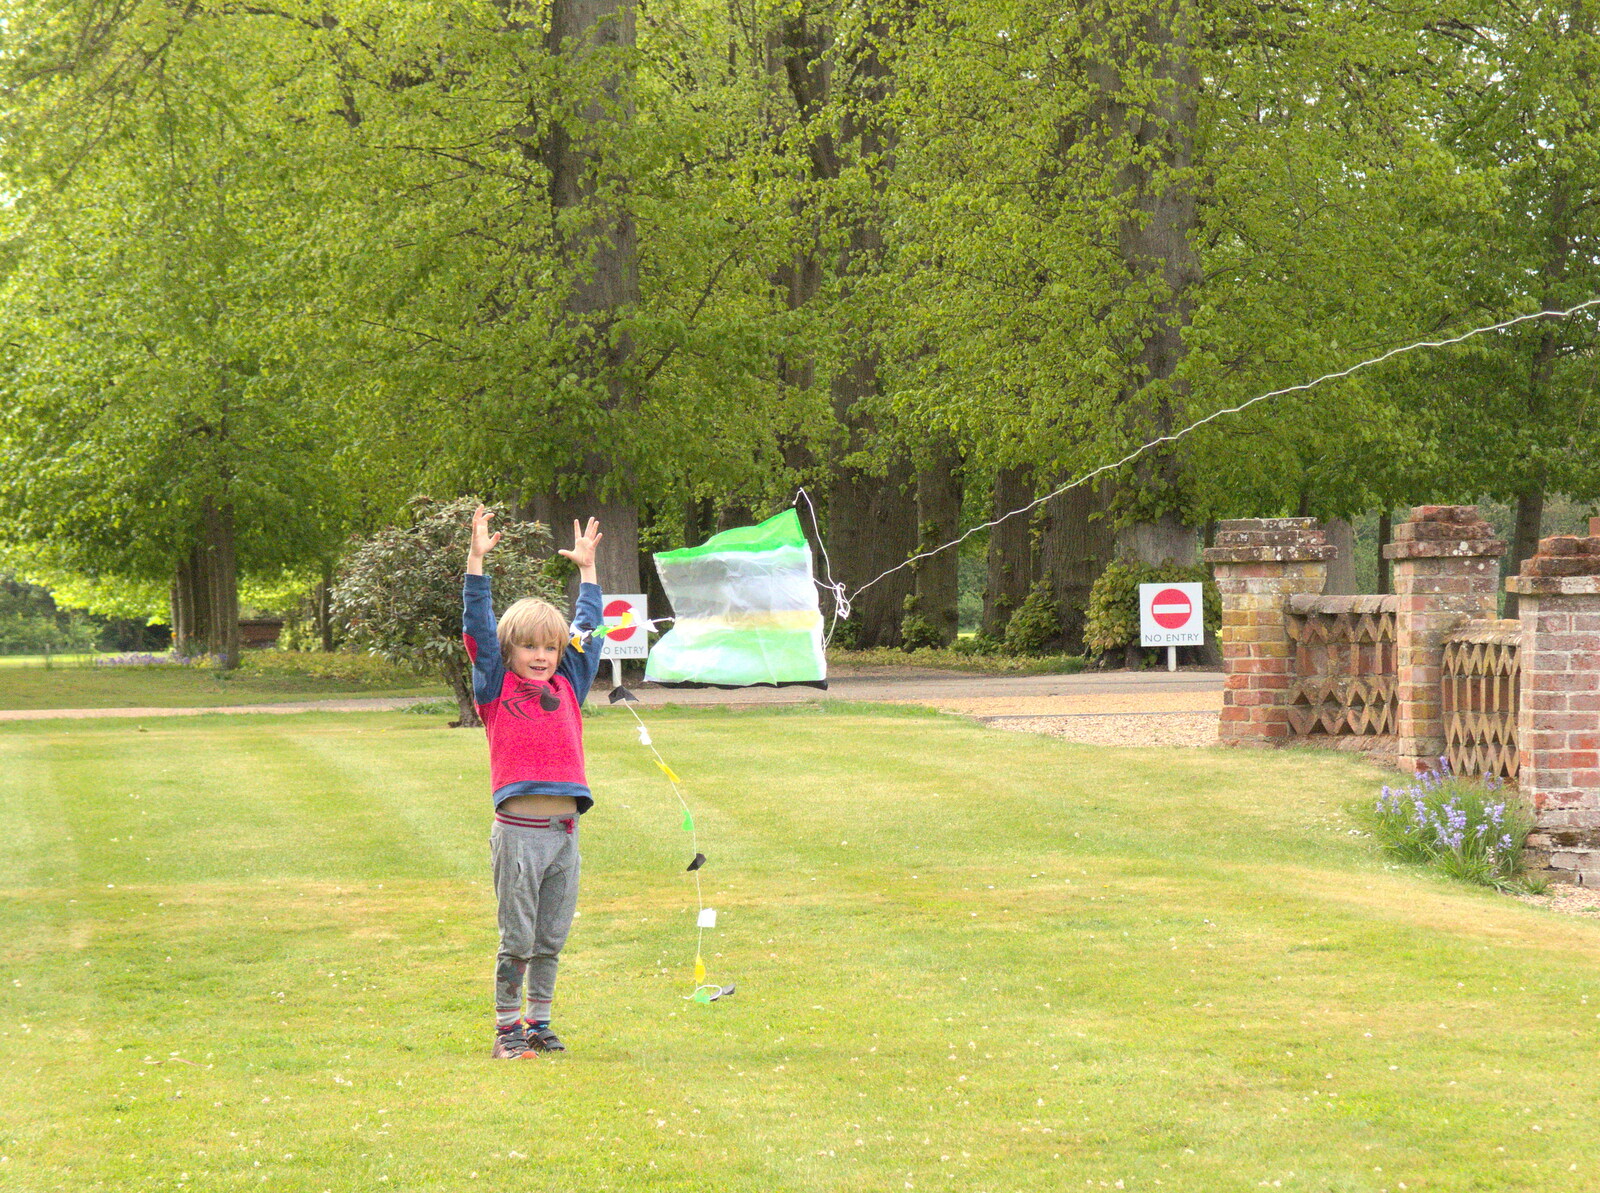 Harry flings a kite in the air from Campfires, Oaksmere Building and a BSCC Bike Ride, Brome, Suffolk - 4th May 2017